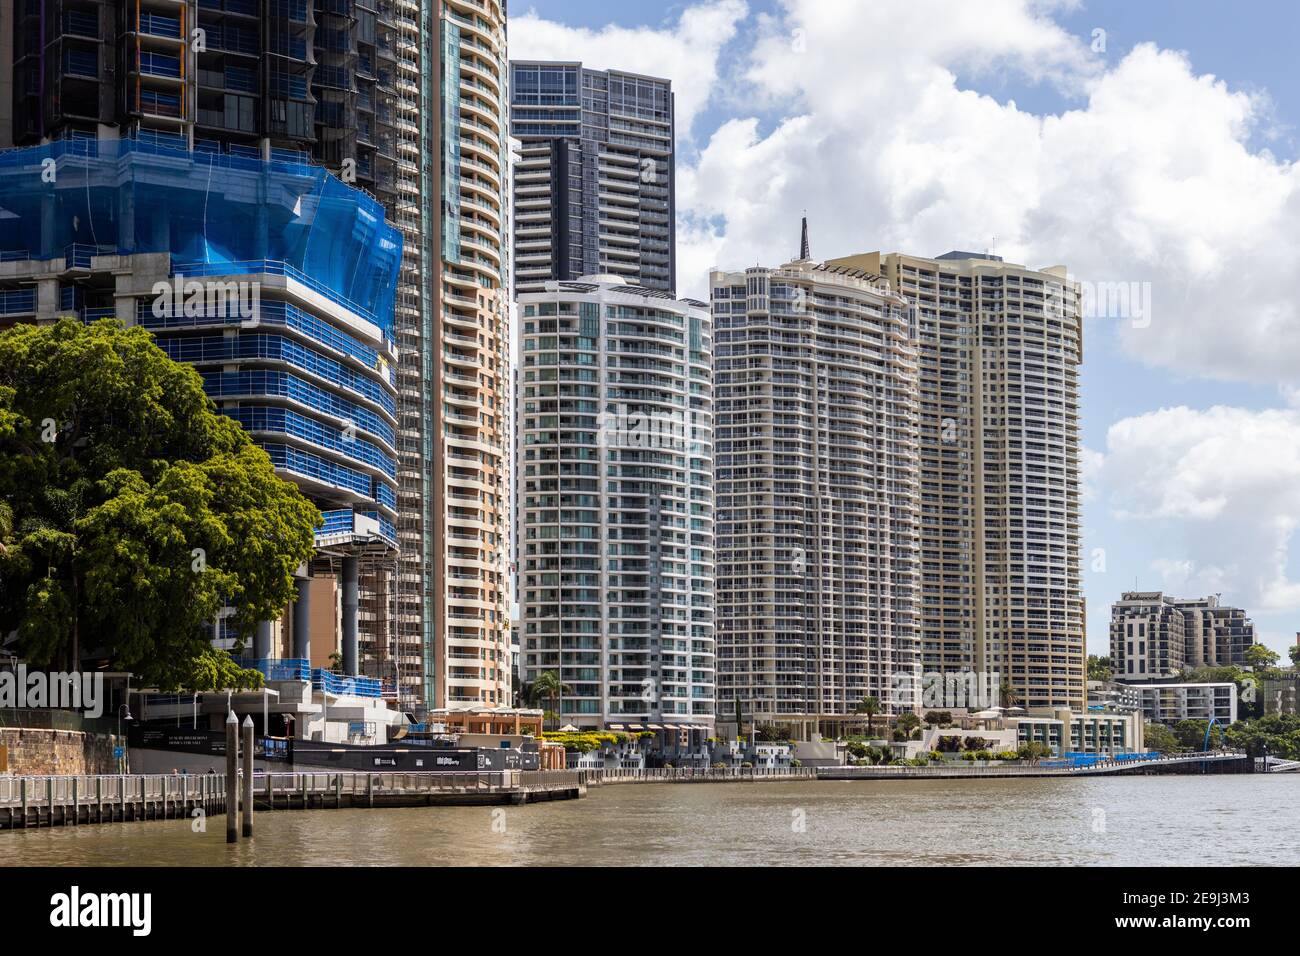 The iconic Brisbane Cityscape along the Brisbane River in Queensland on February 1st 2021 Stock Photo